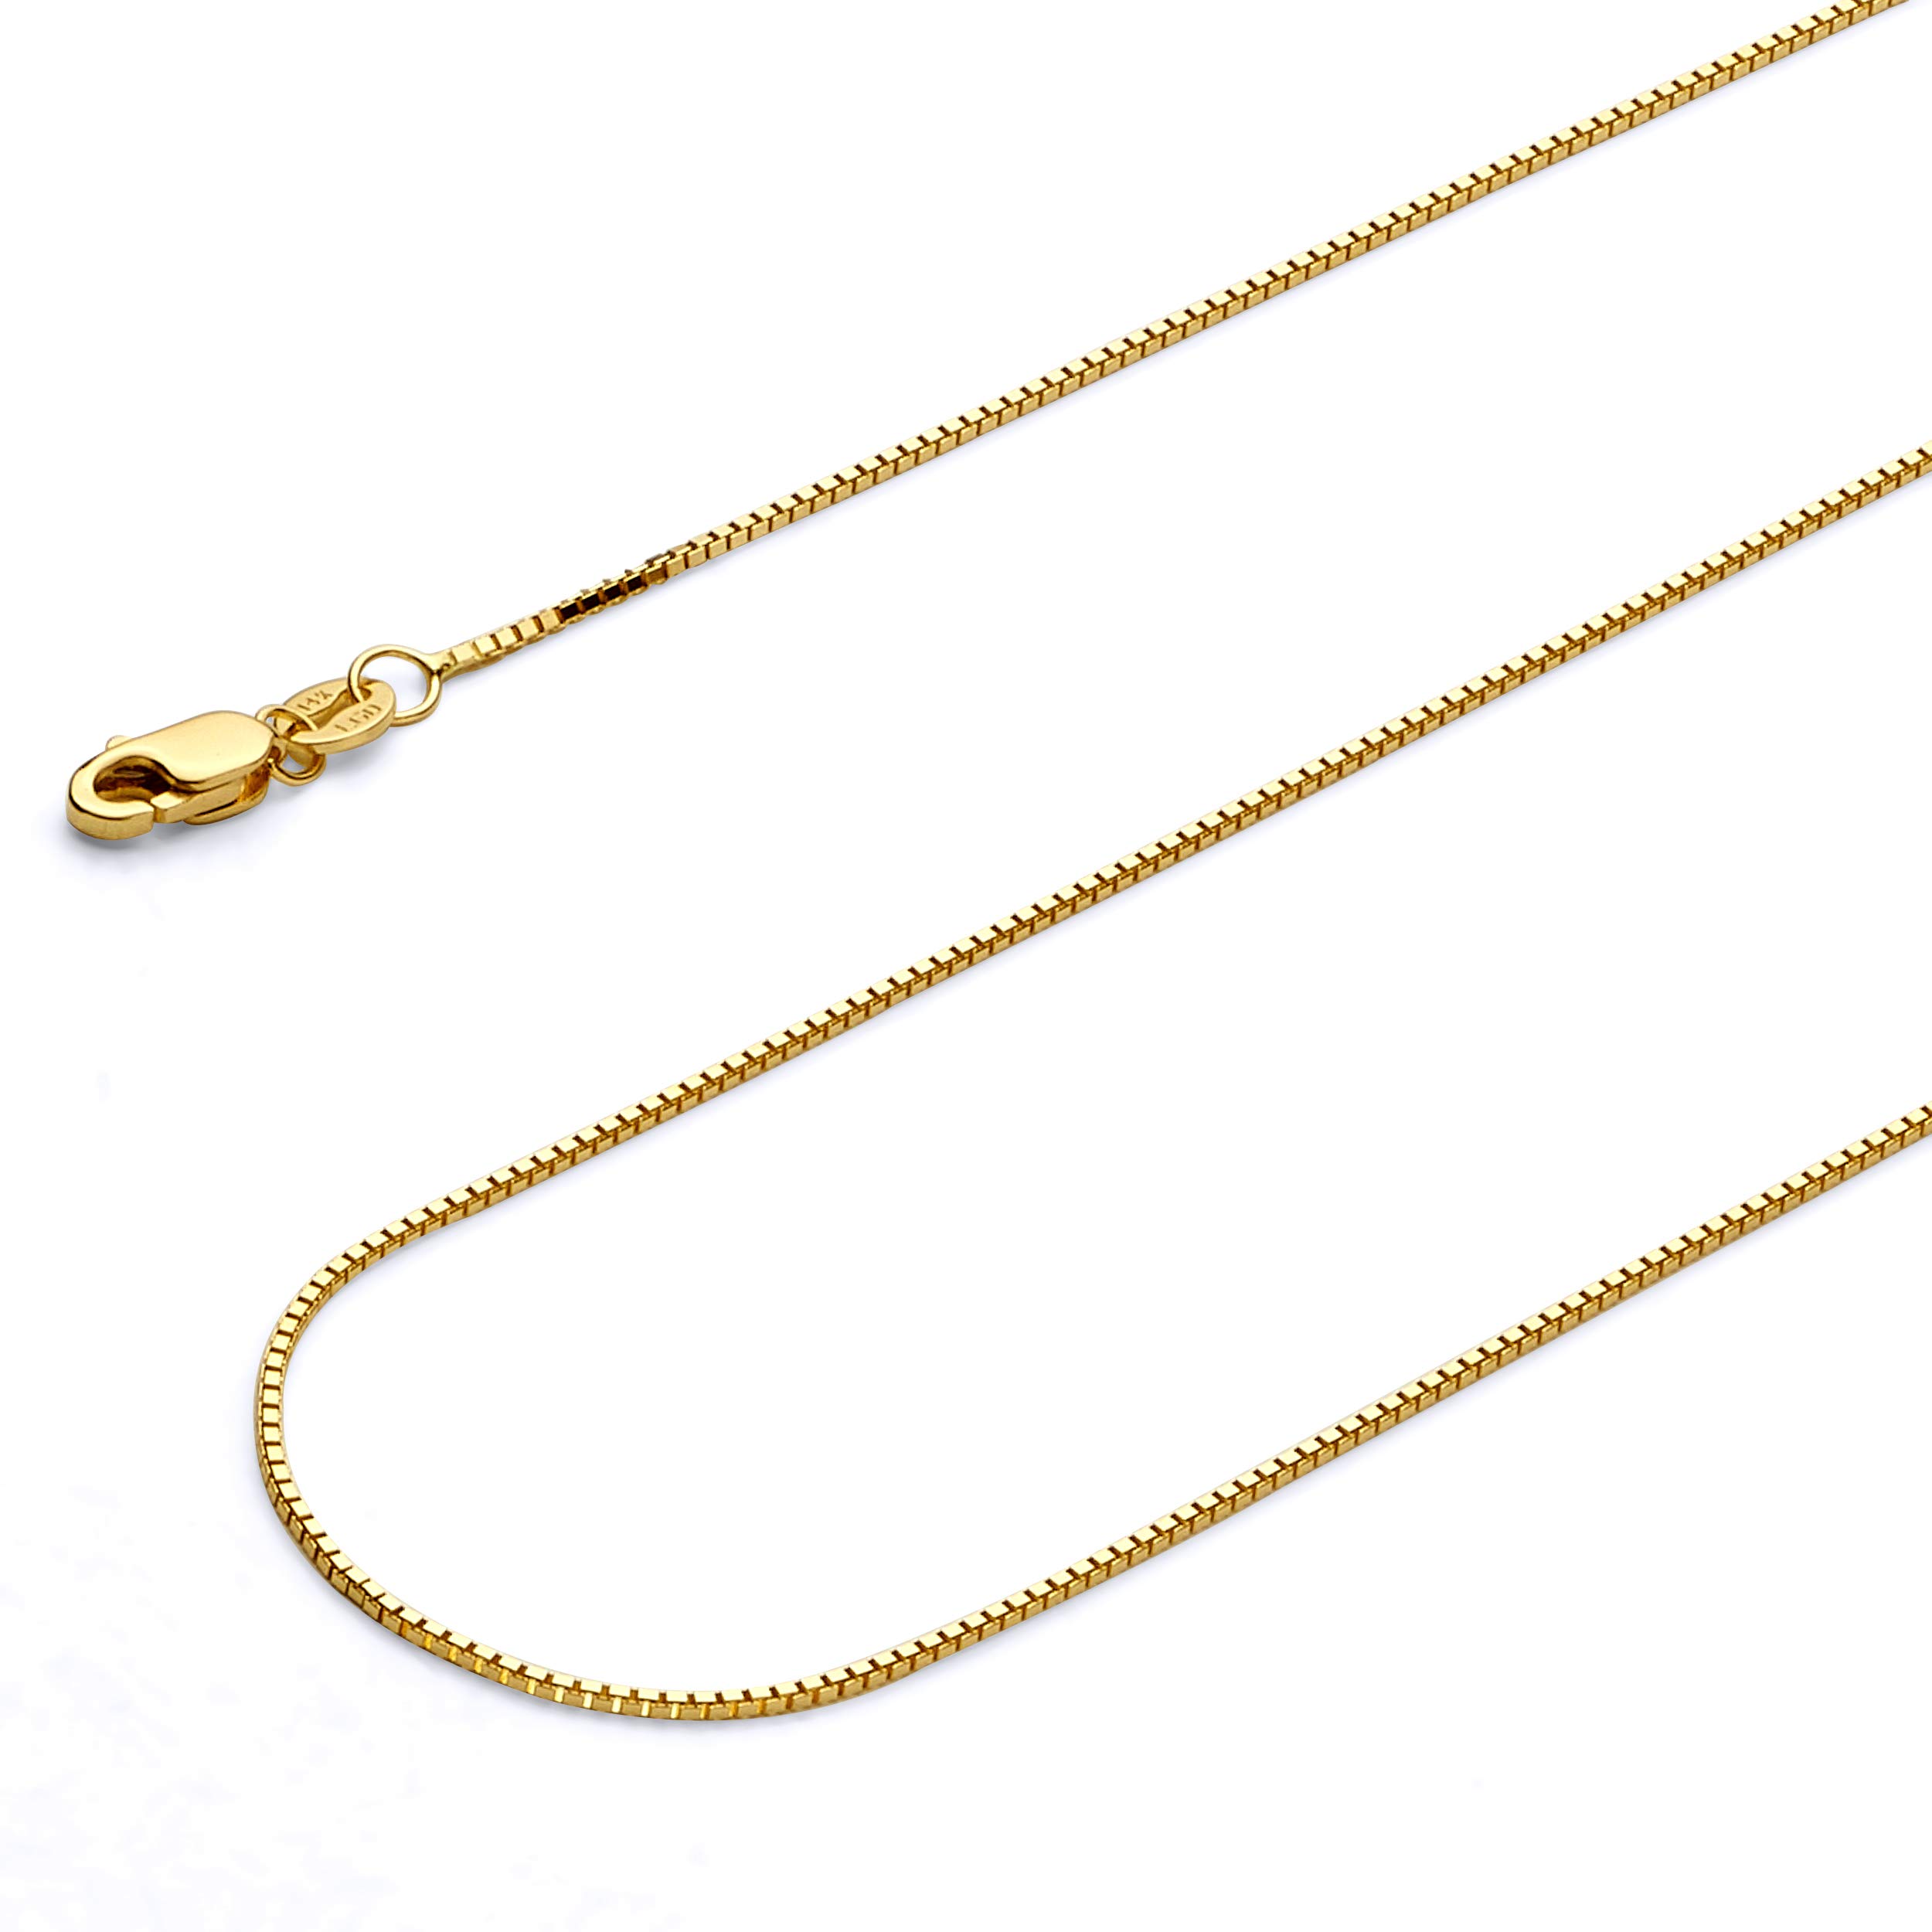 14k REAL Yellow OR White OR Rose/Pink Gold Solid 0.9mm Box Link Chain Necklace with Lobster Claw Clasp